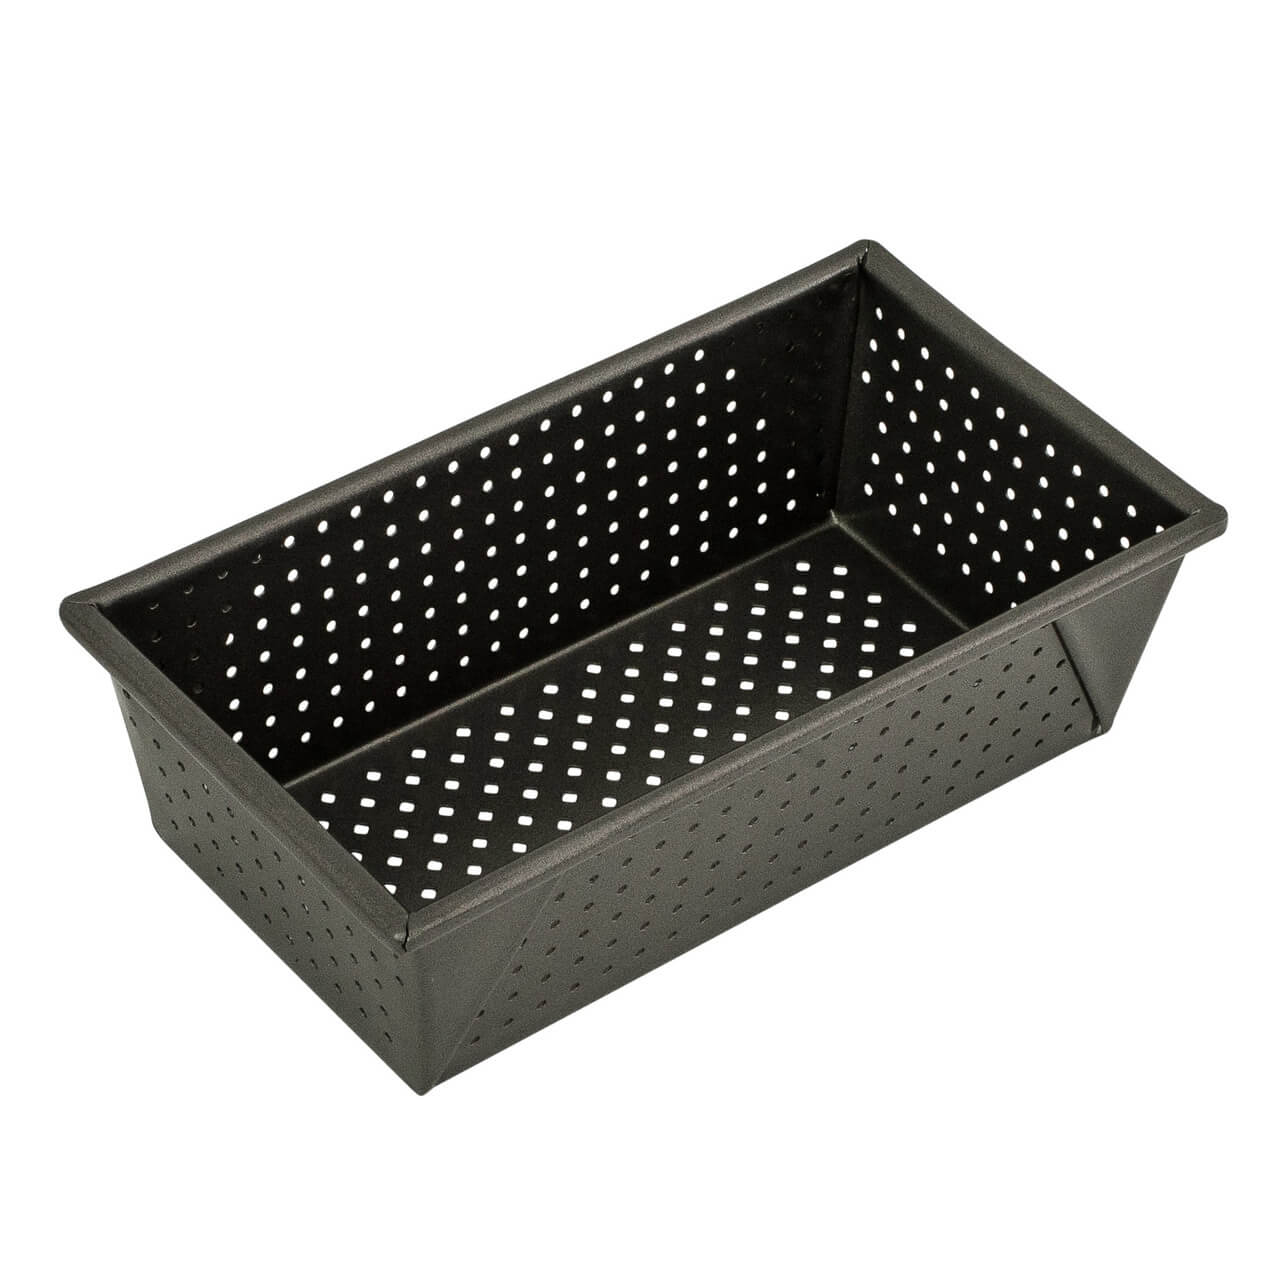 Bakemaster Perfect Crust Box Sided Loaf Pan